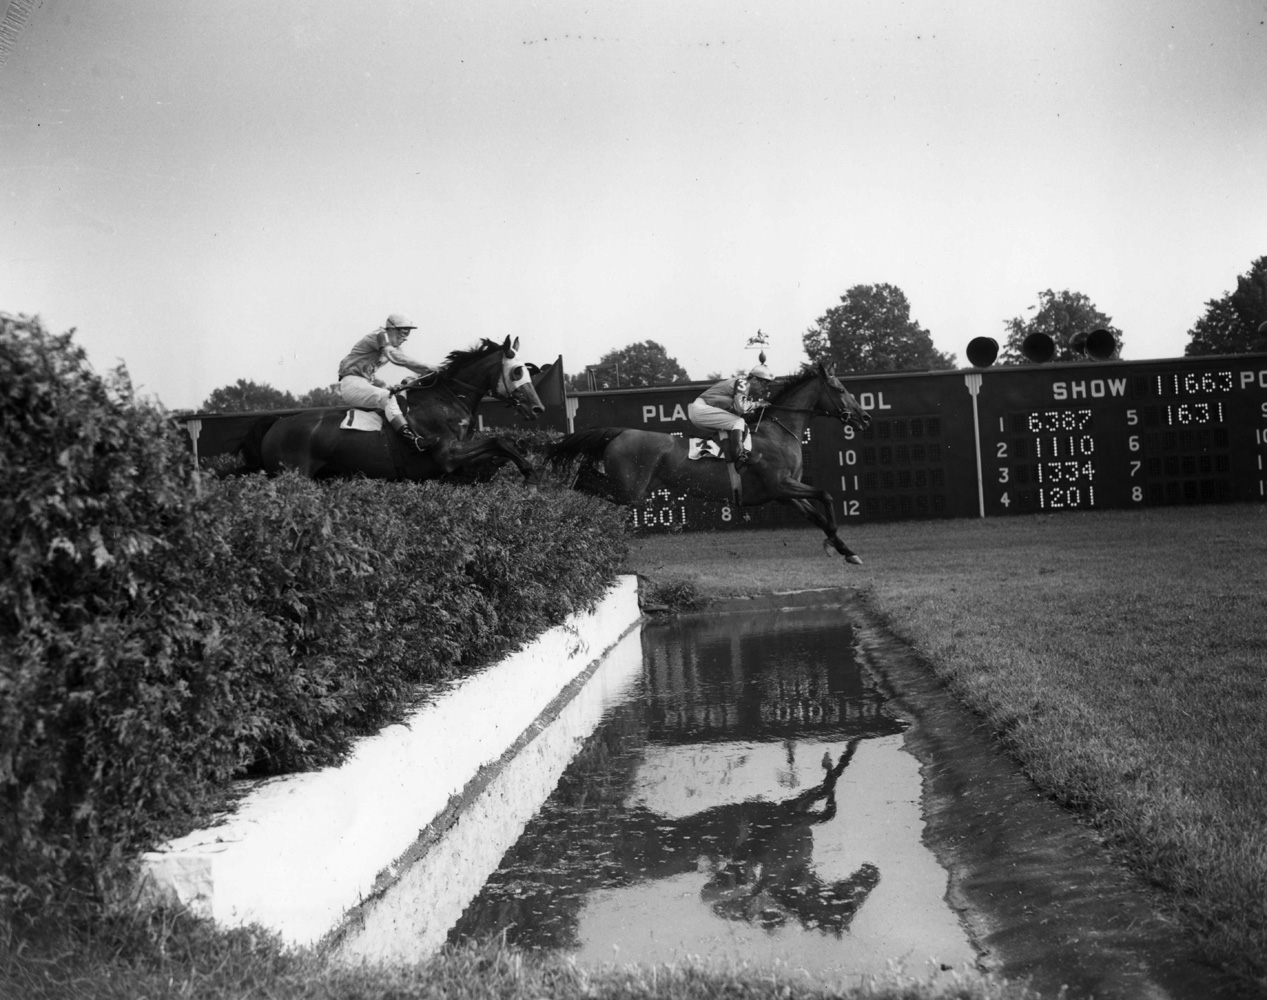 Elkridge (Frank Dooley Adams up) at the water jump in the 1950 Saratoga Handicap Steeplechase (Keeneland Library Morgan Collection/Museum Collection)